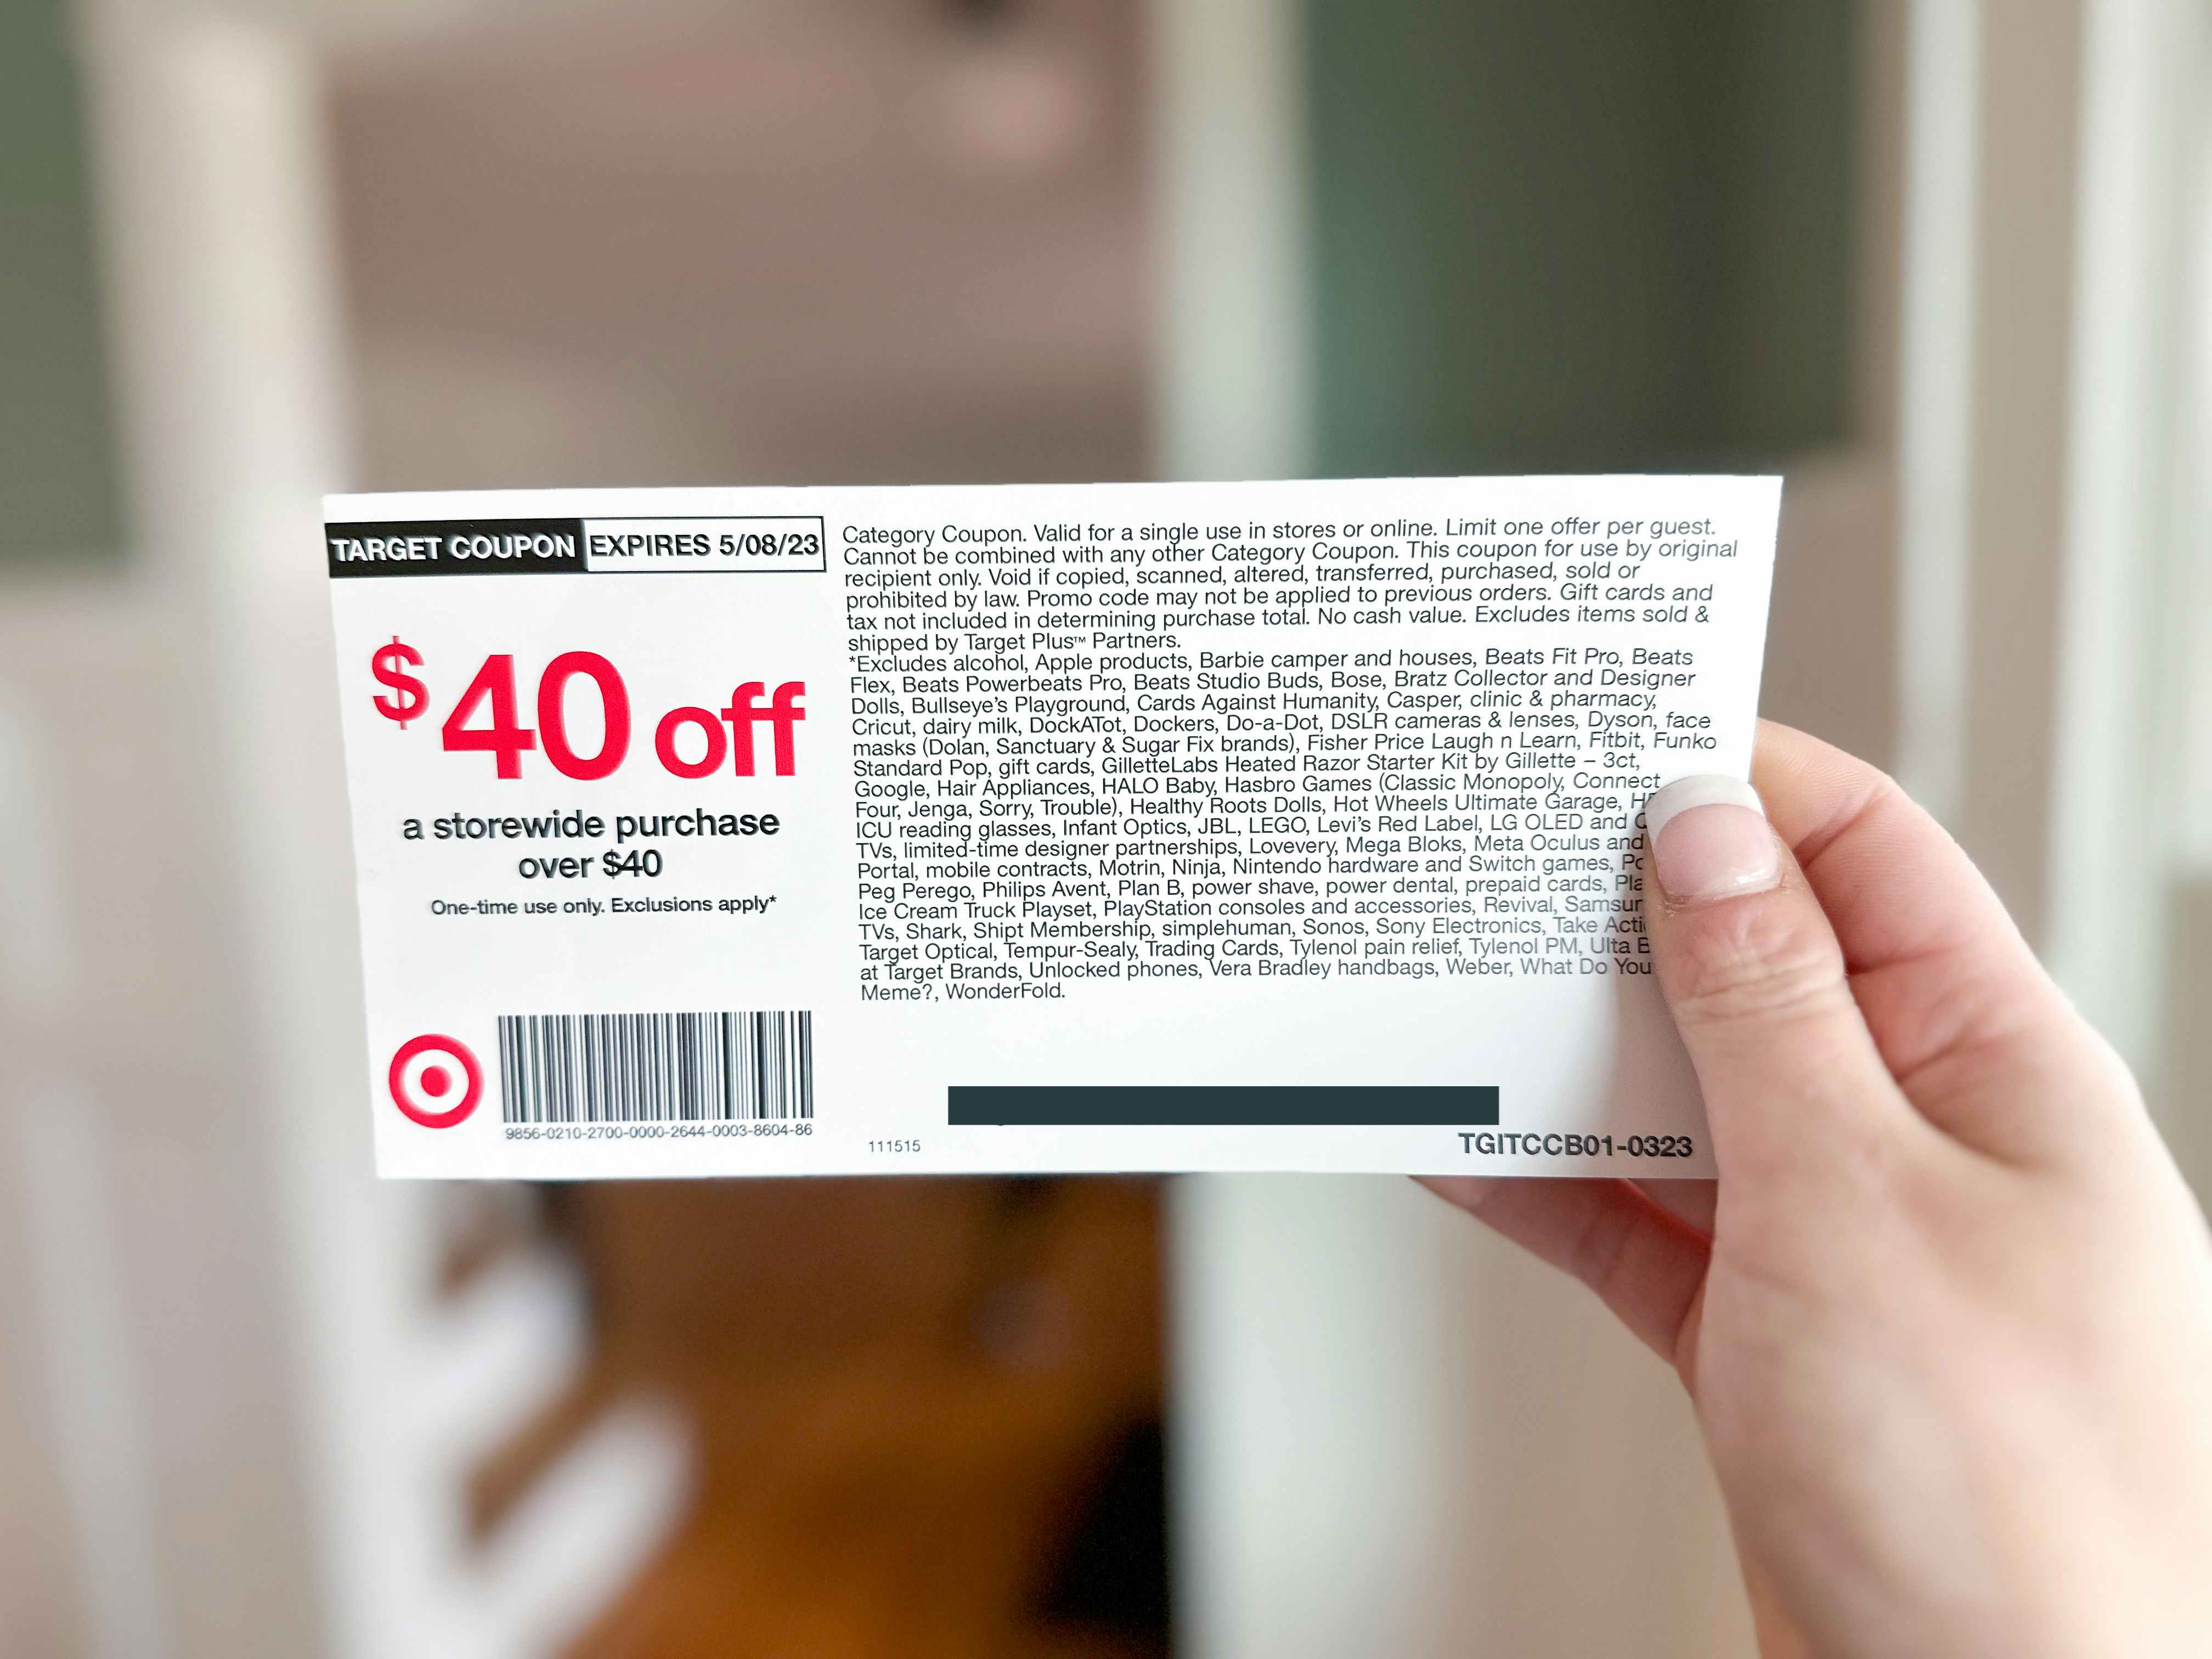 A woman's hand holding up a $40 off coupon from the limited-time Target RedCard offer for new members